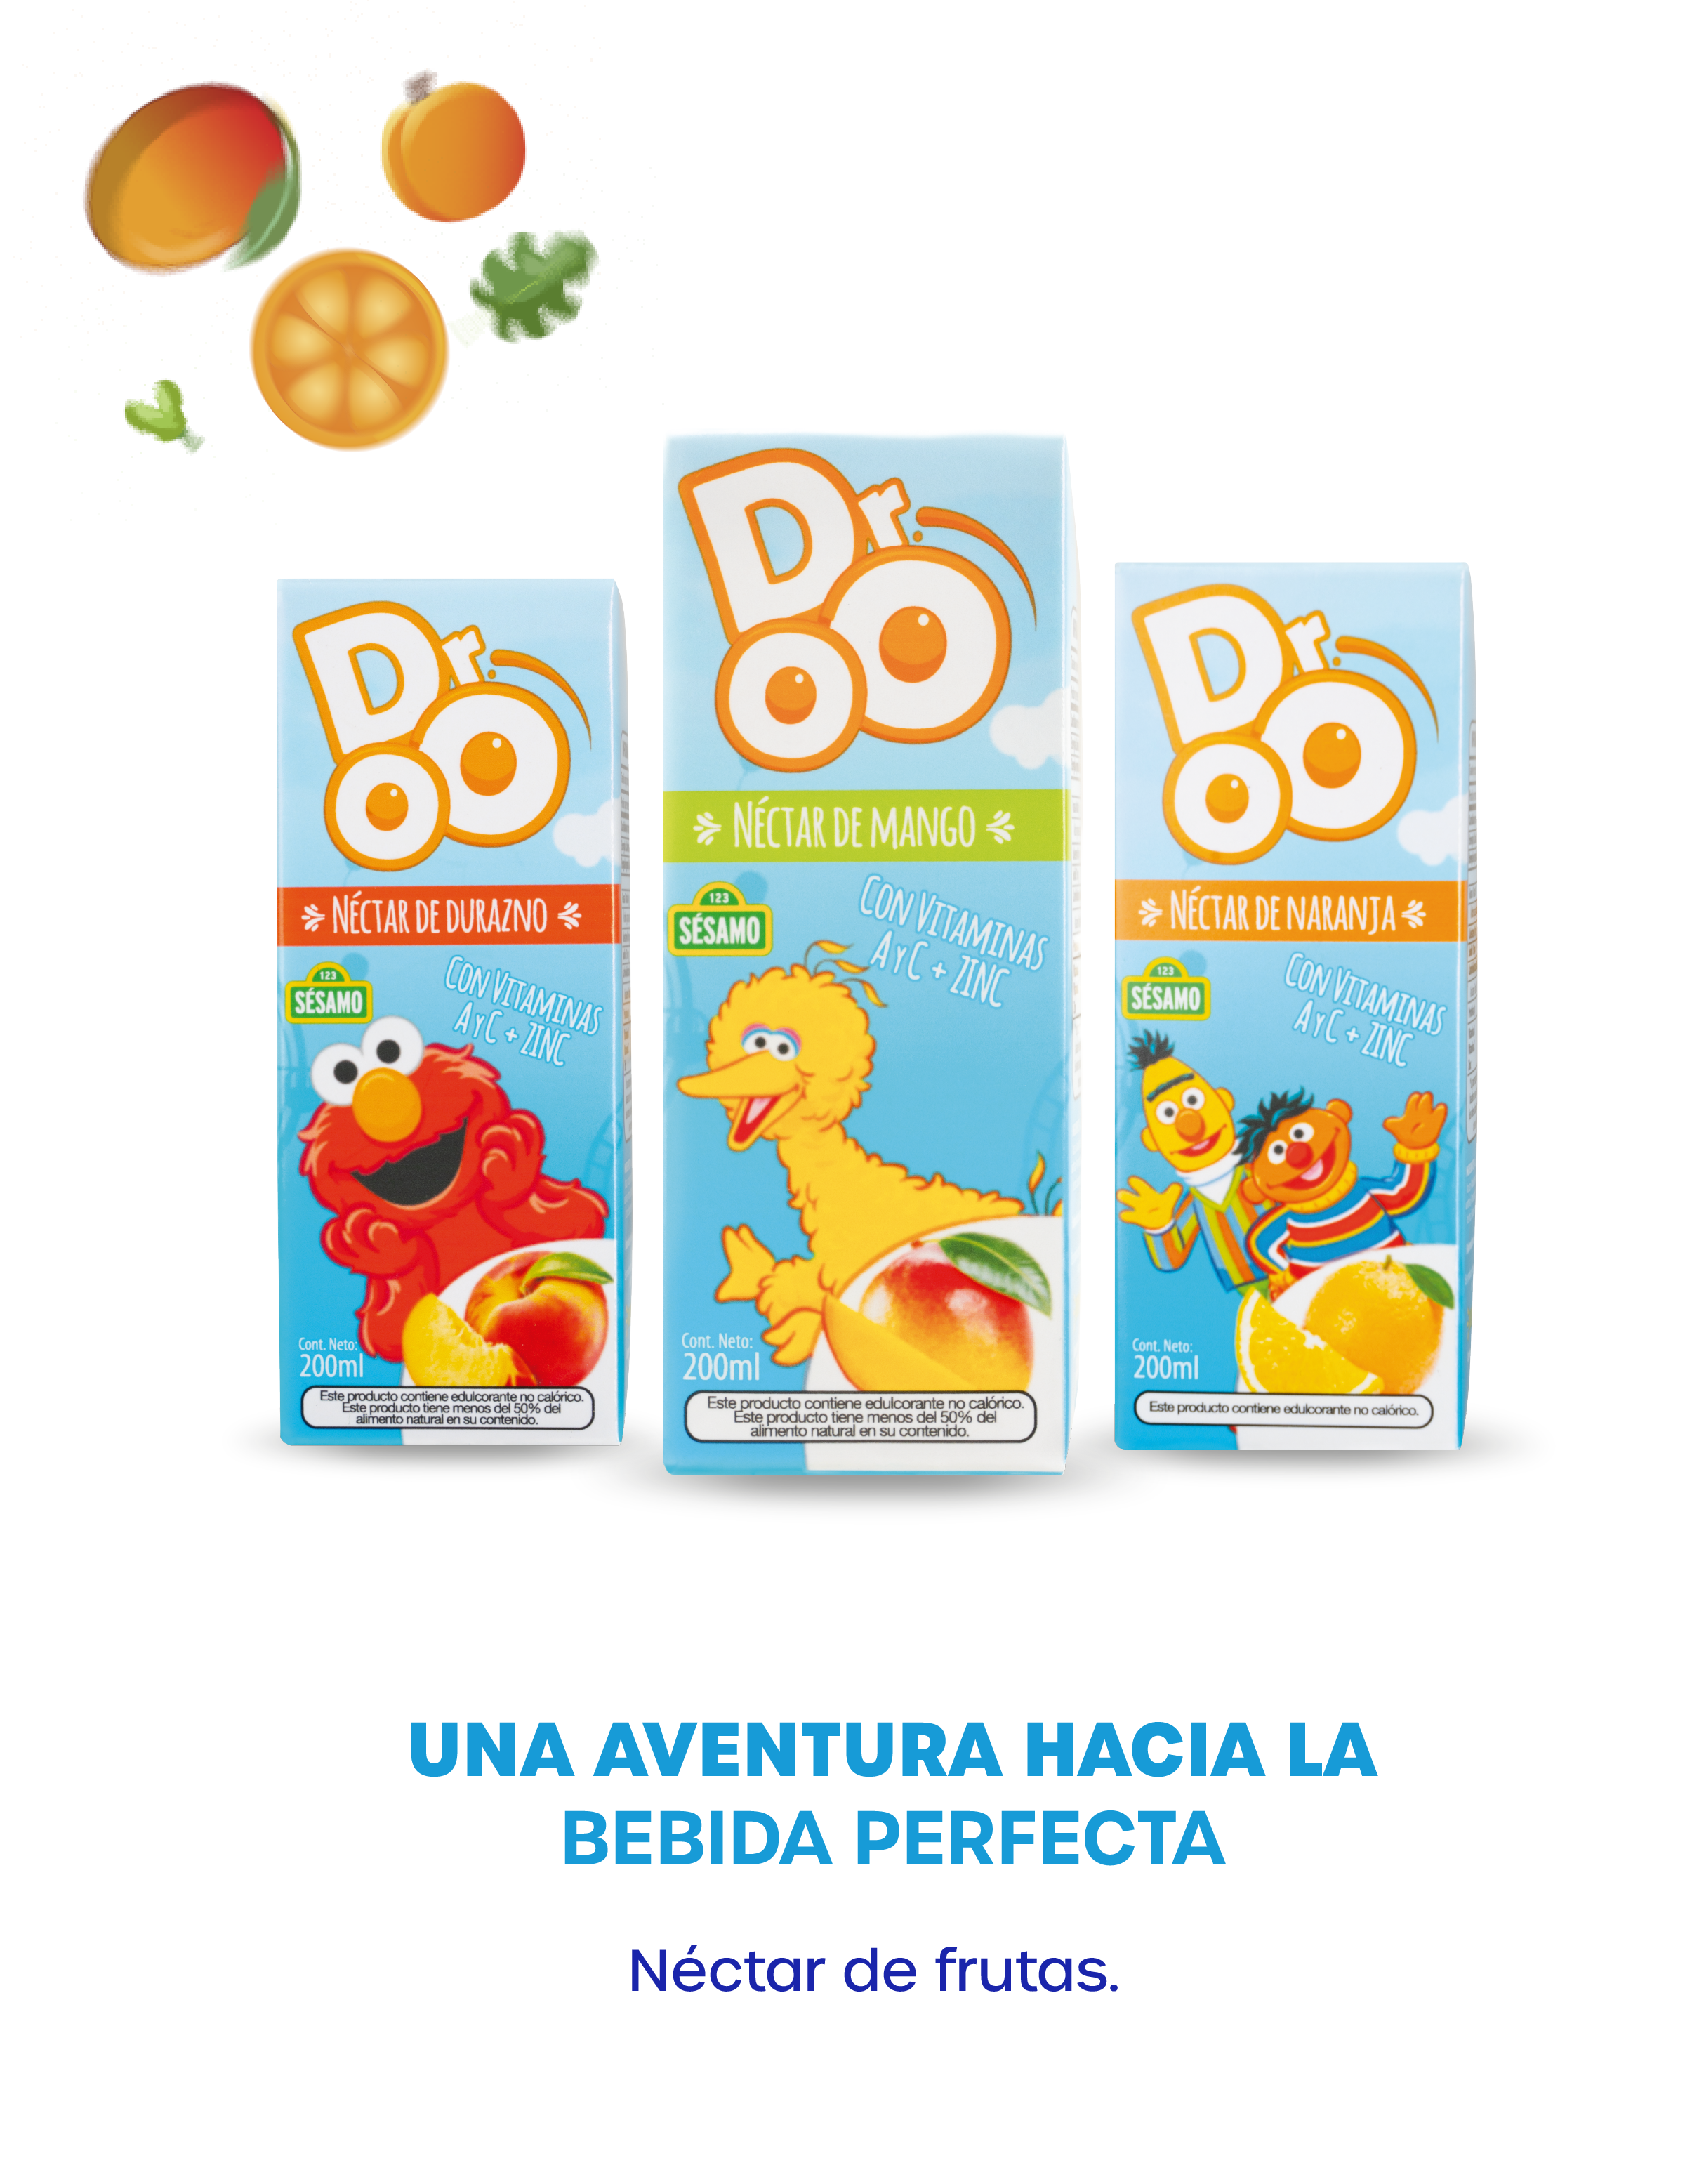 Droo productos 3x